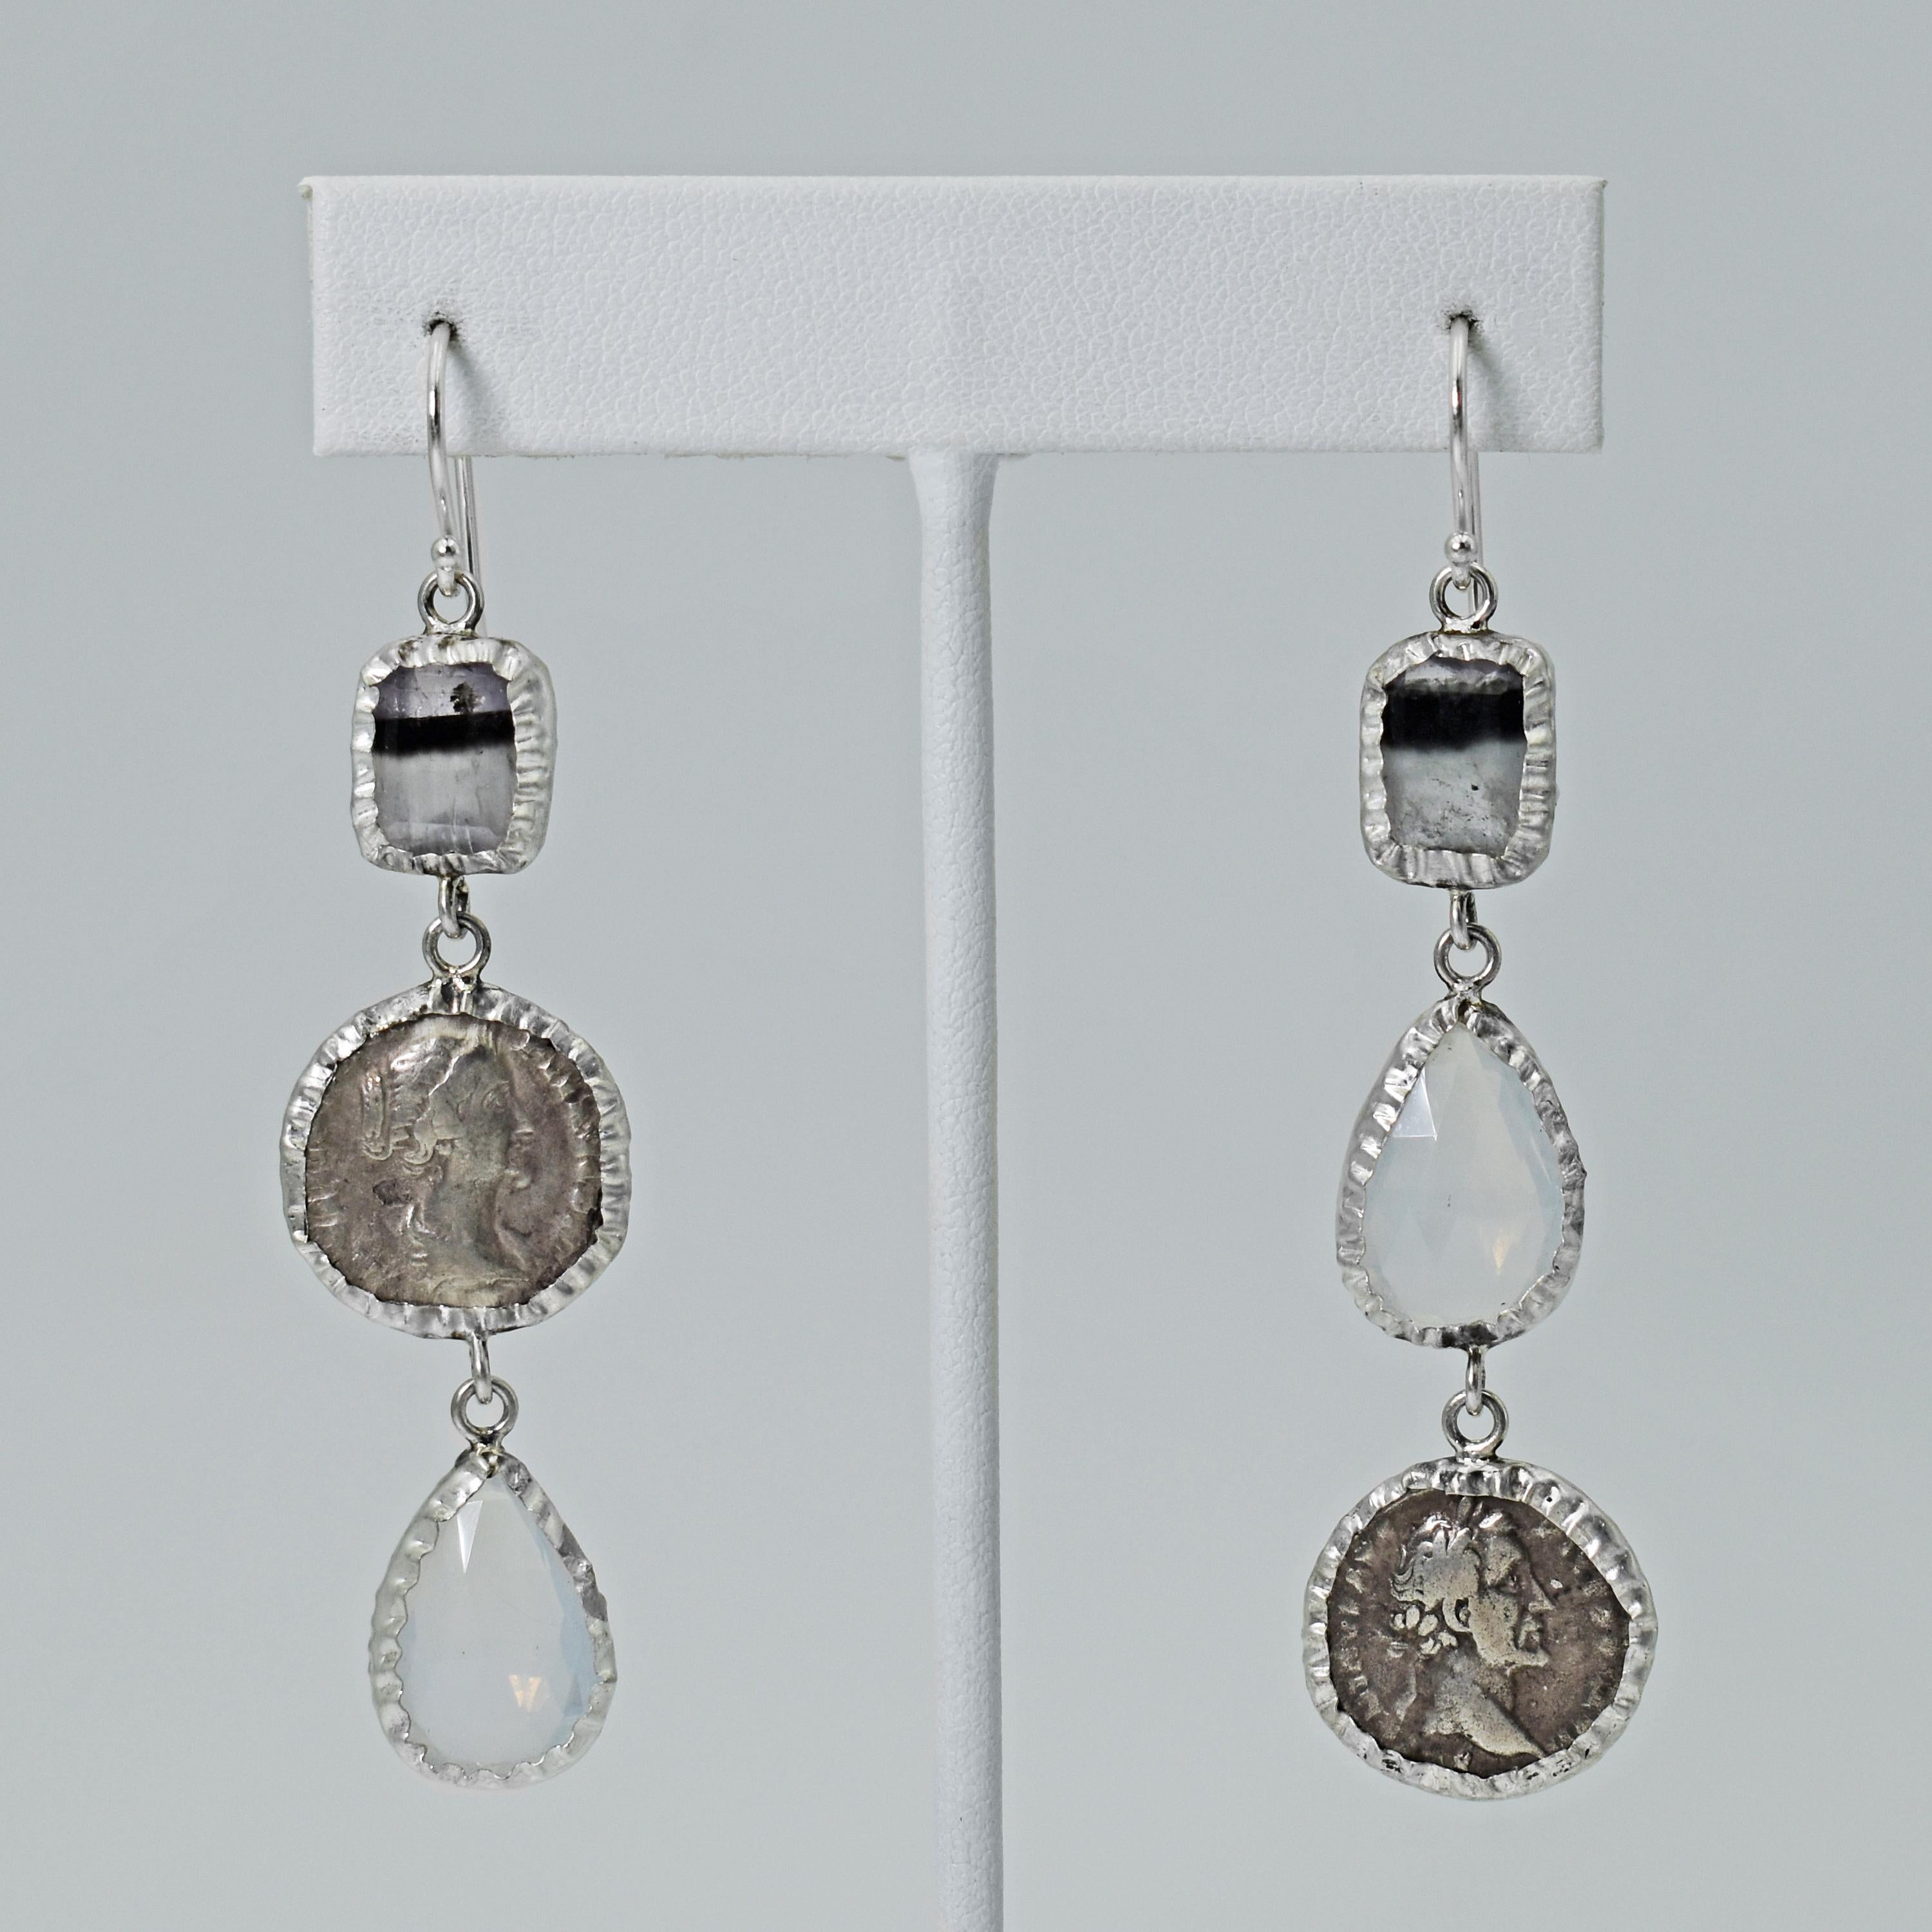 Blue John Fluorite, ancient Greek silver coin and rose cut Moonstone sterling silver asymmetrical dangle earrings. Matching pendant necklace is available separately on our storefront. Unique, one-of-a-kind dangle artisan earrings.